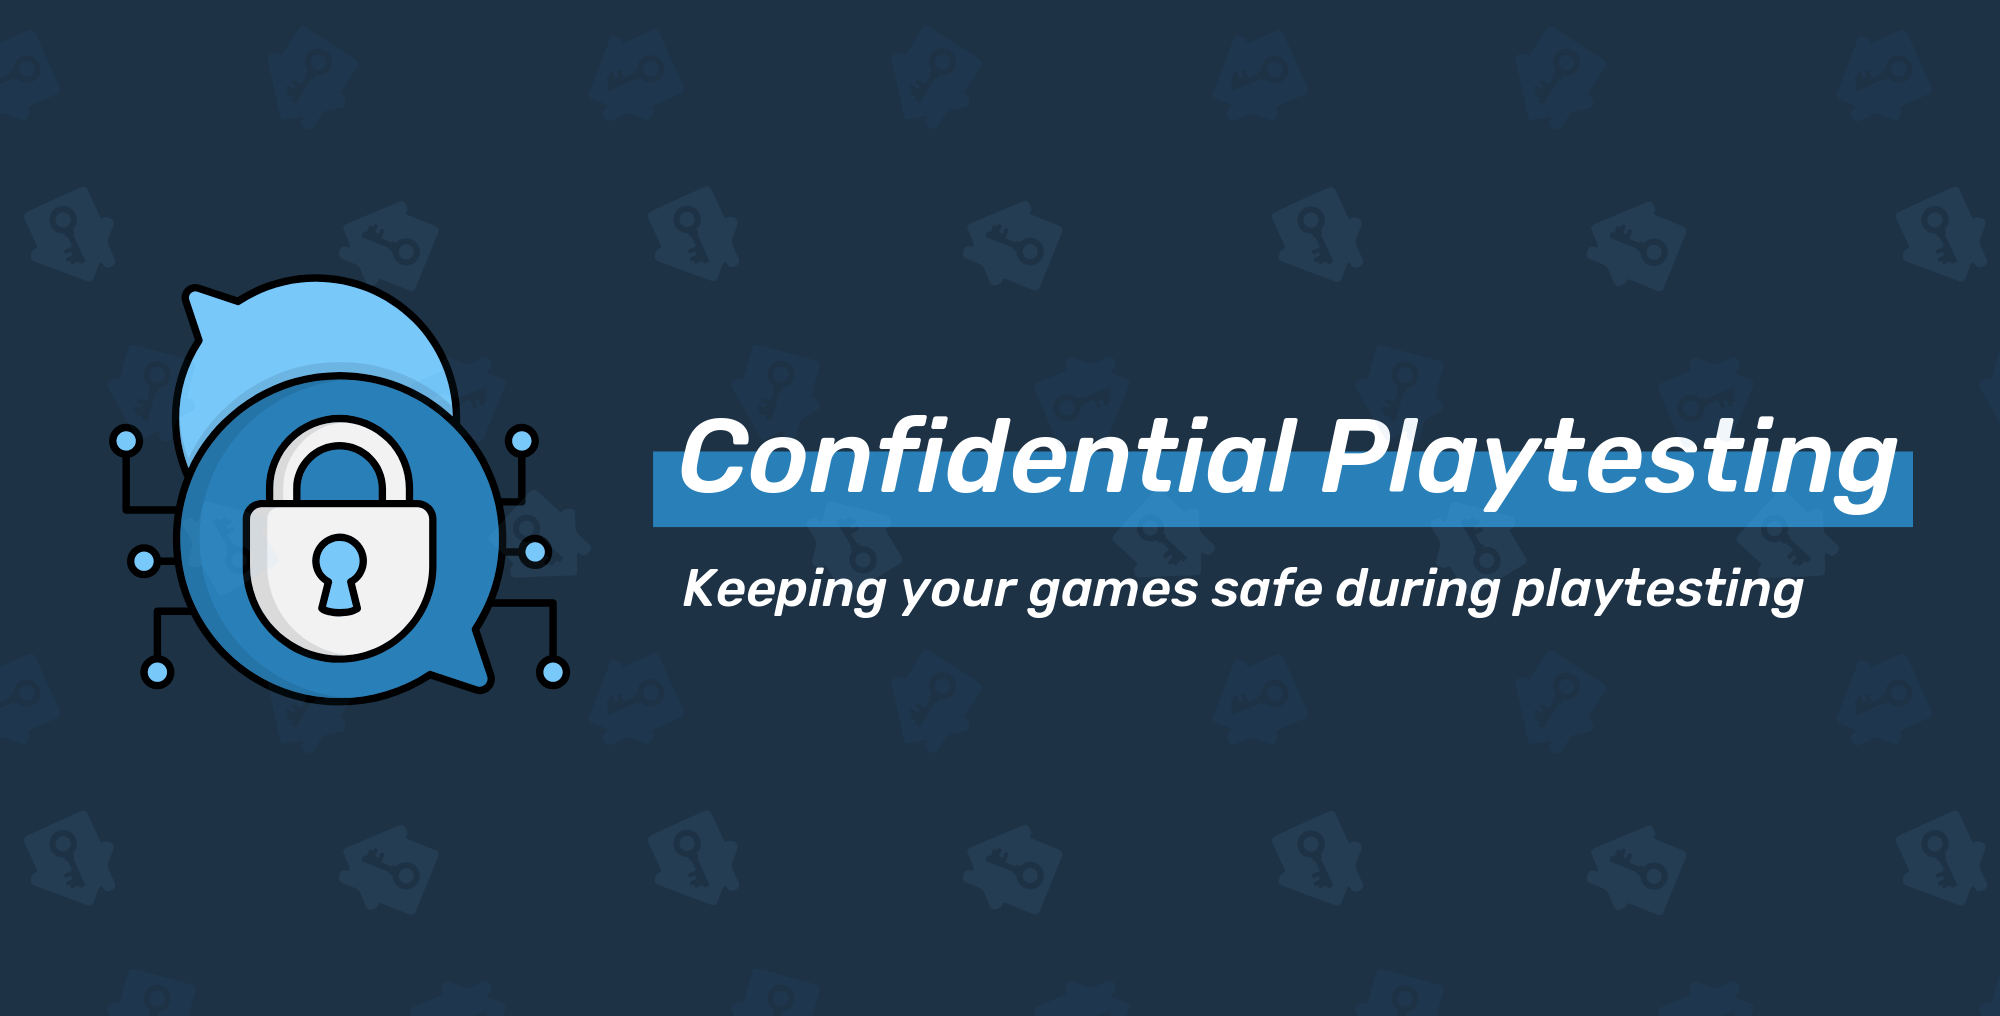 Testing In-Development Games: Here’s How We Protect Your Games